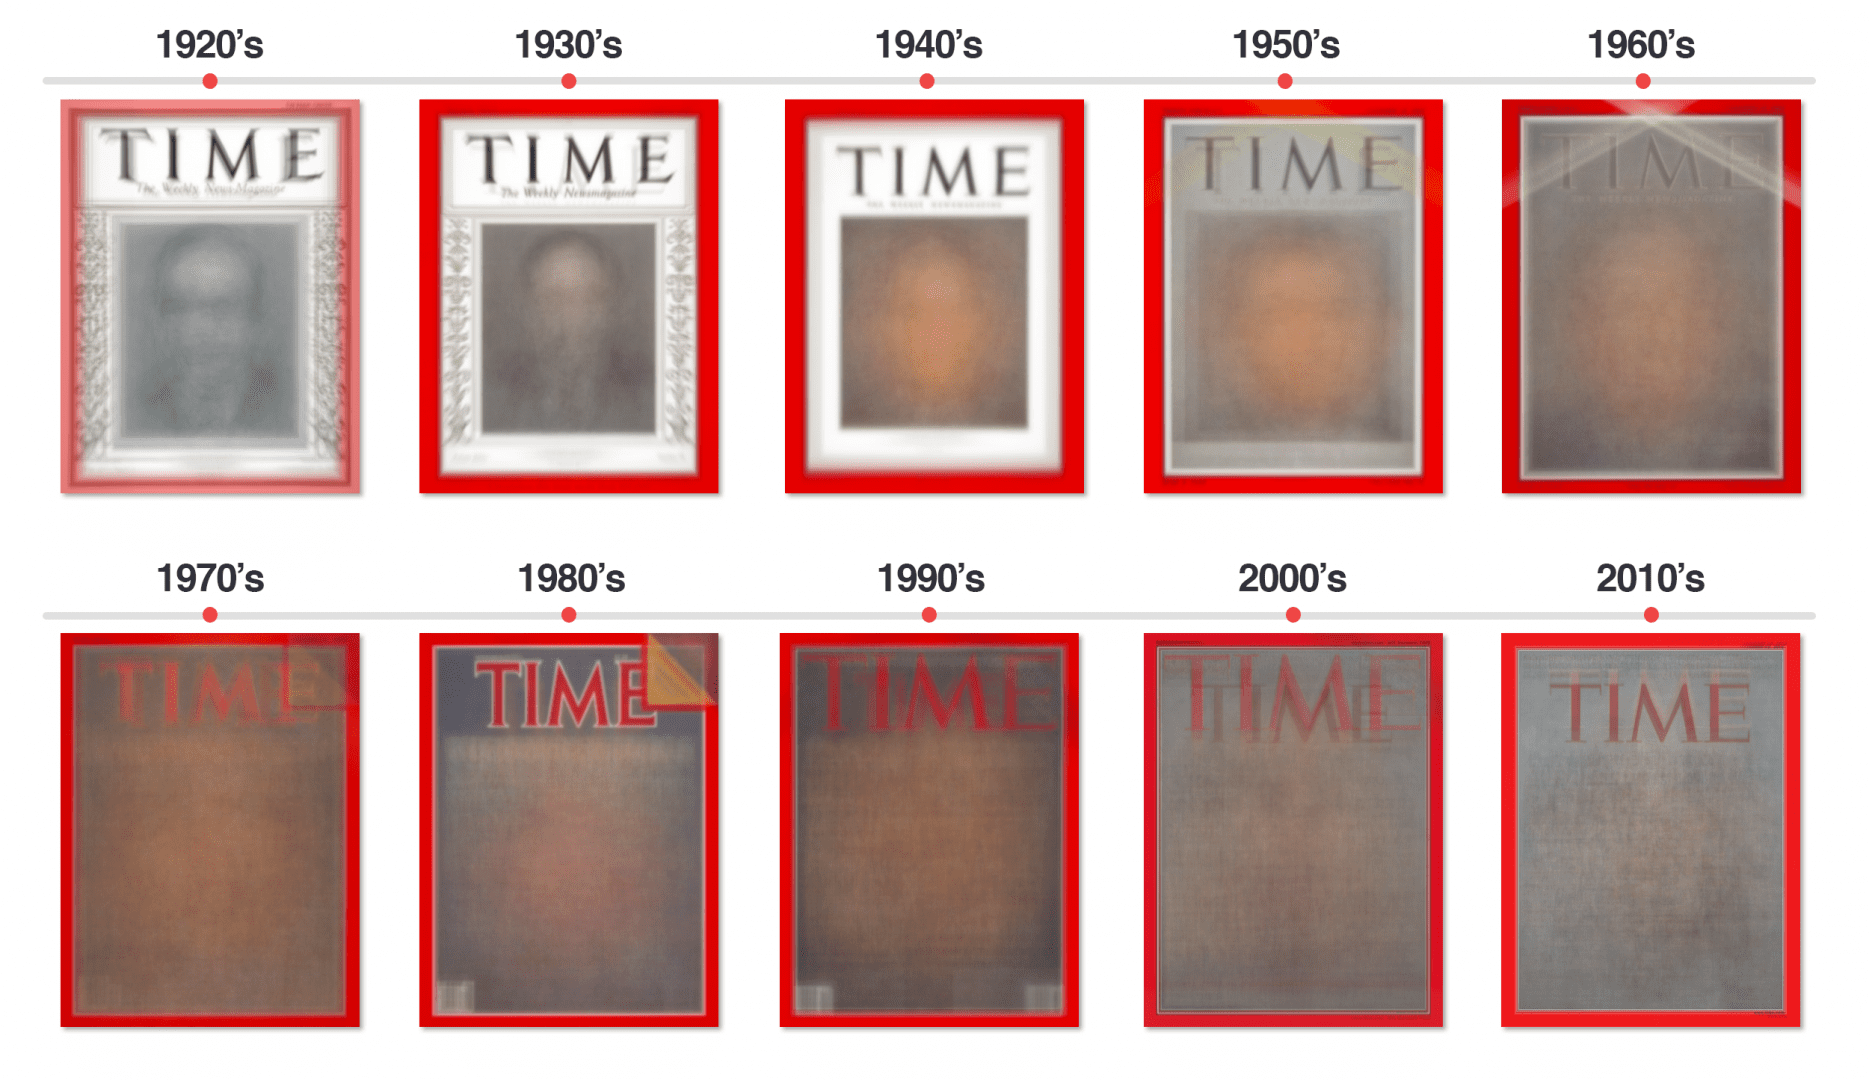 analyzing-91-years-of-time-magazine-covers-for-visual-trends-pyimagesearch